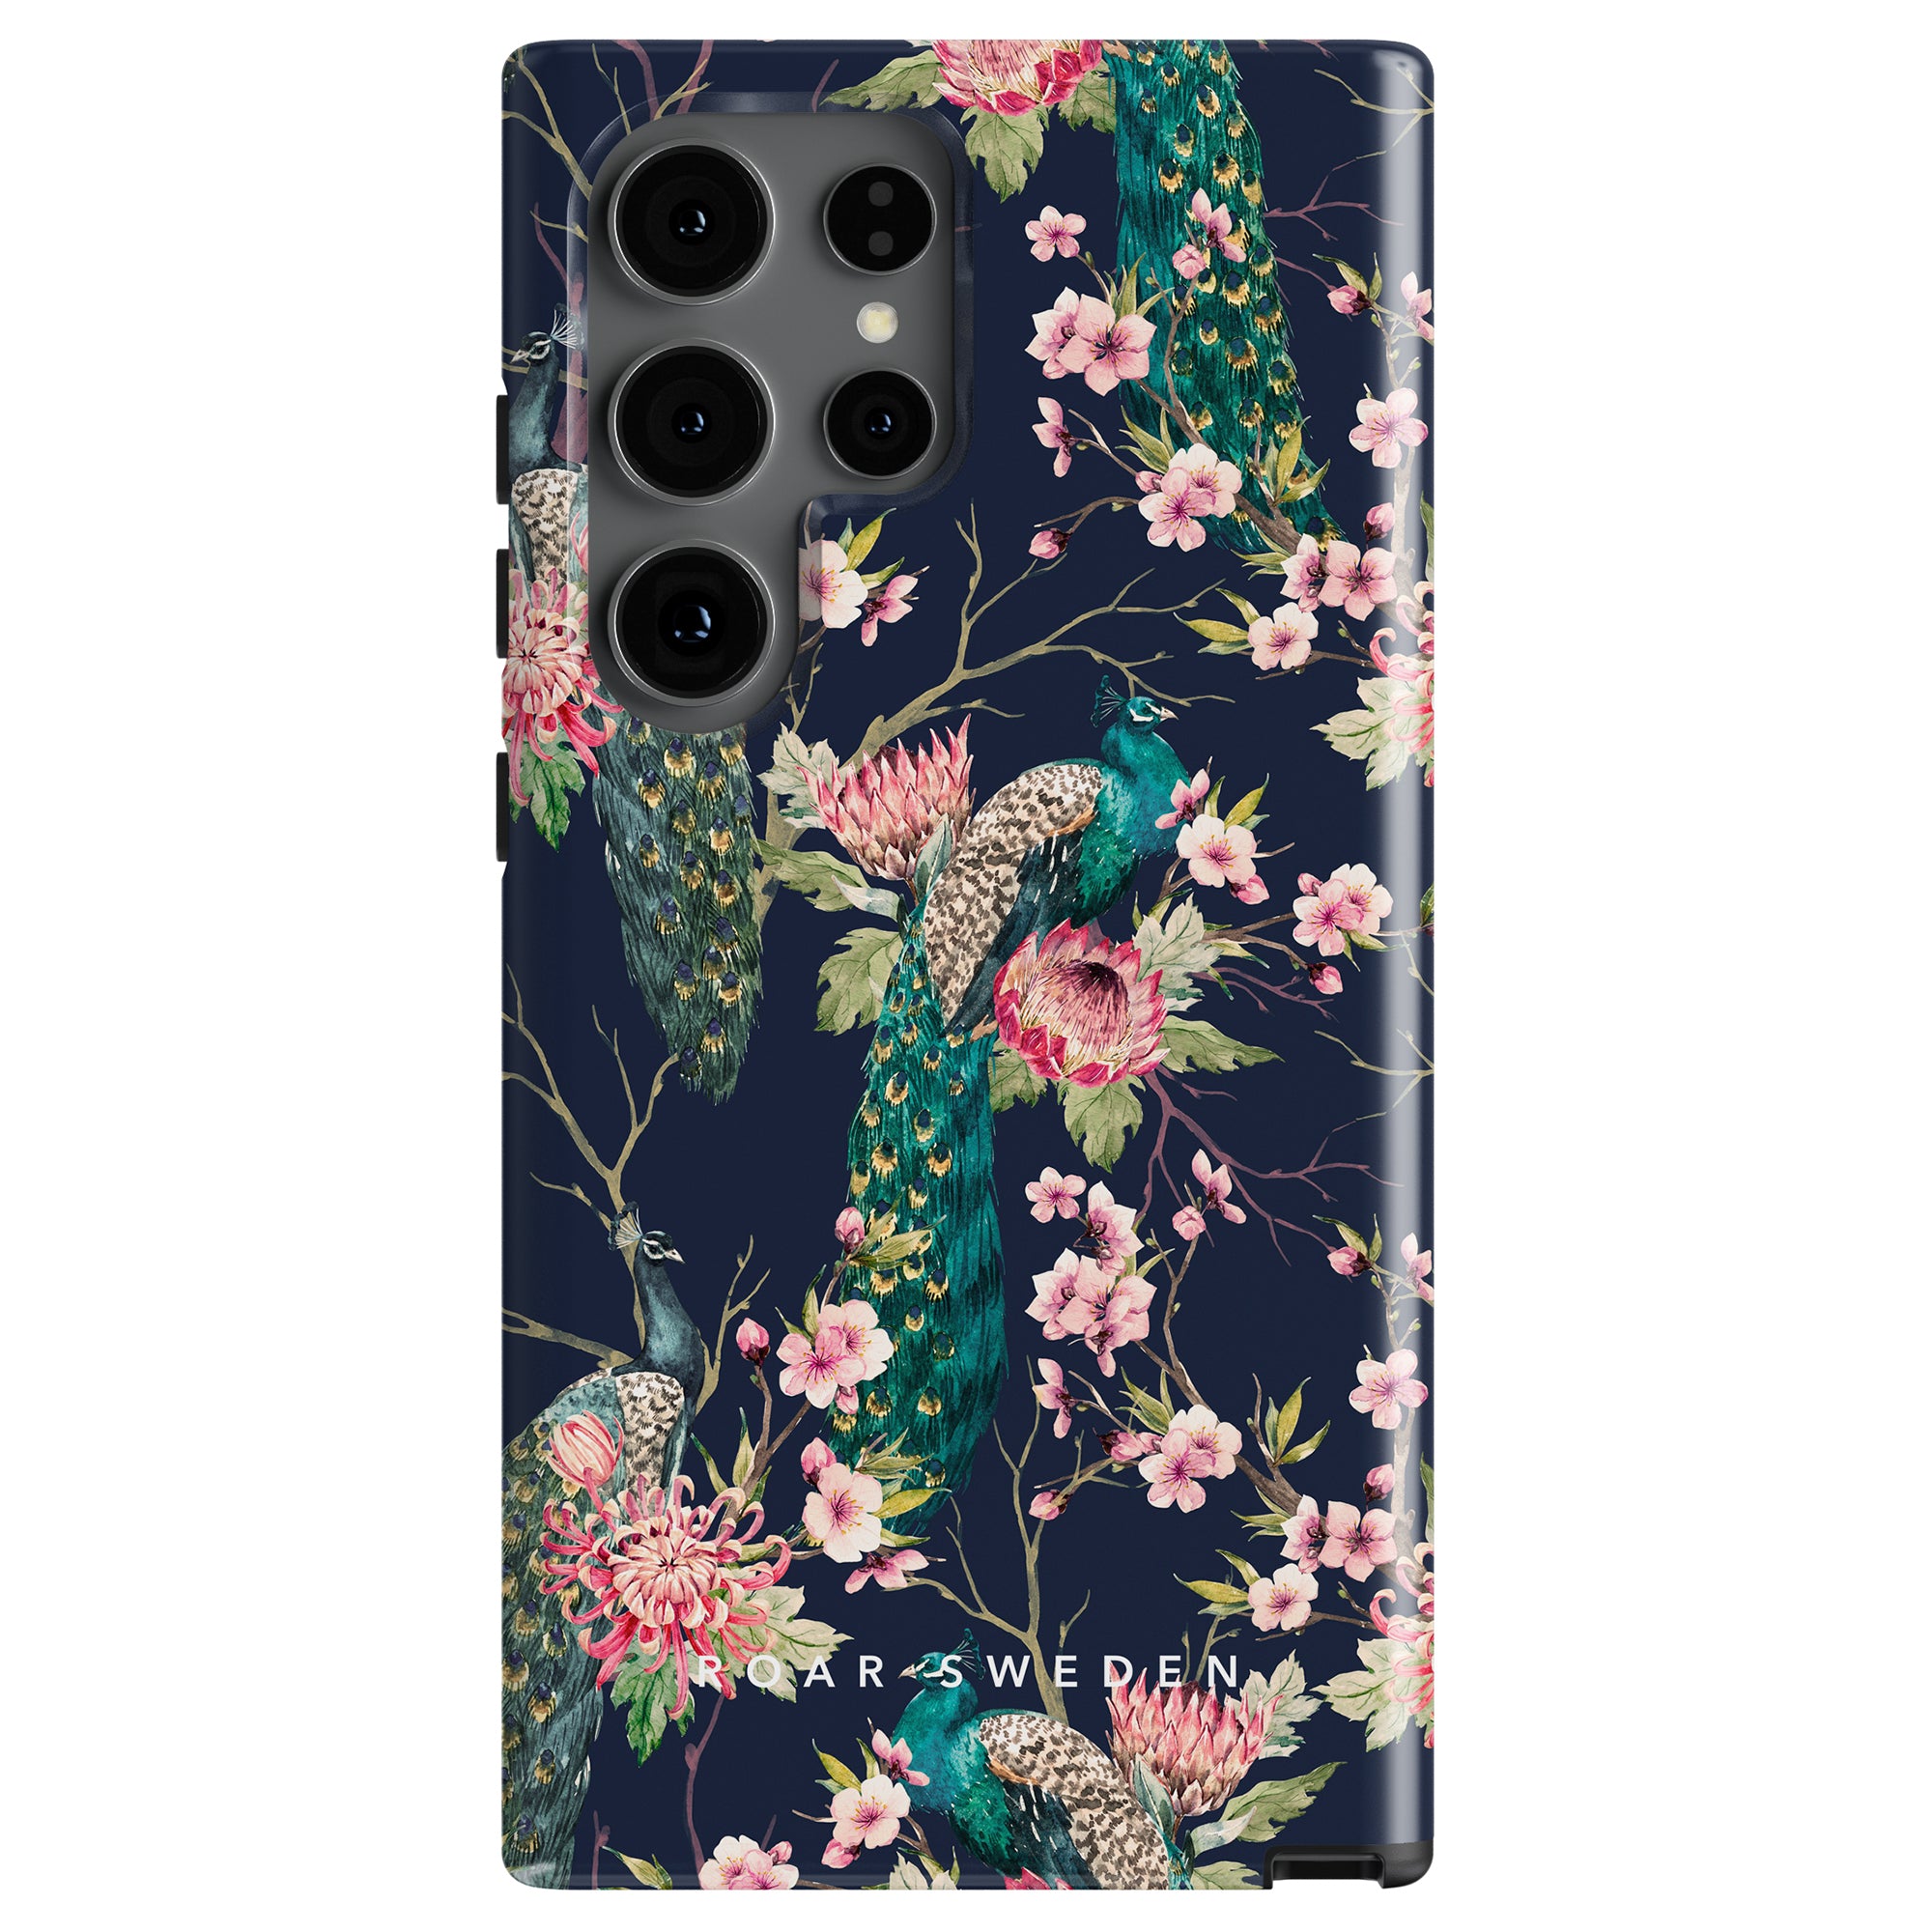 Introducing the Peafowl - Tough case—a smartphone case with a floral and peacock pattern on a dark blue background, featuring multiple peacock images interspersed with pink and cream flowers. Crafted from högkvalitativt material, this case ensures pålitligt skydd for your device.